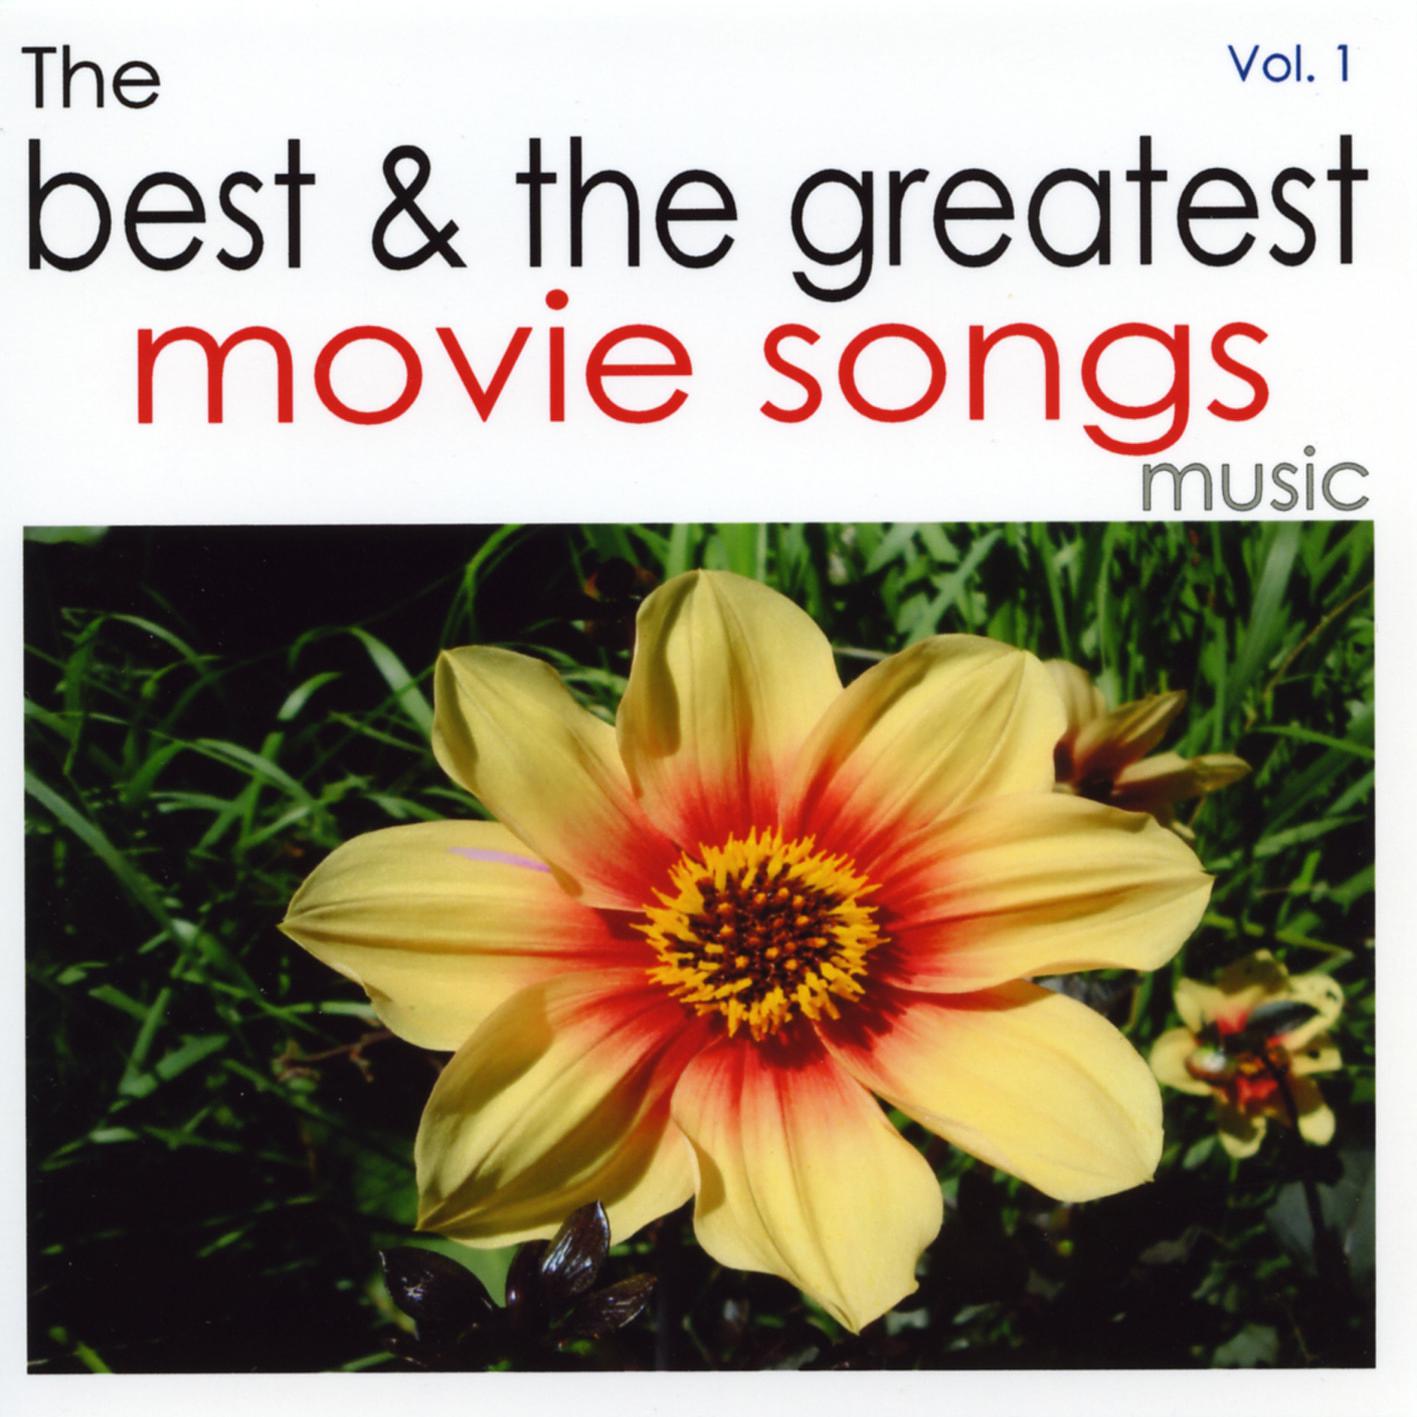 The Best & The Greatest Movie Songs Vol.1